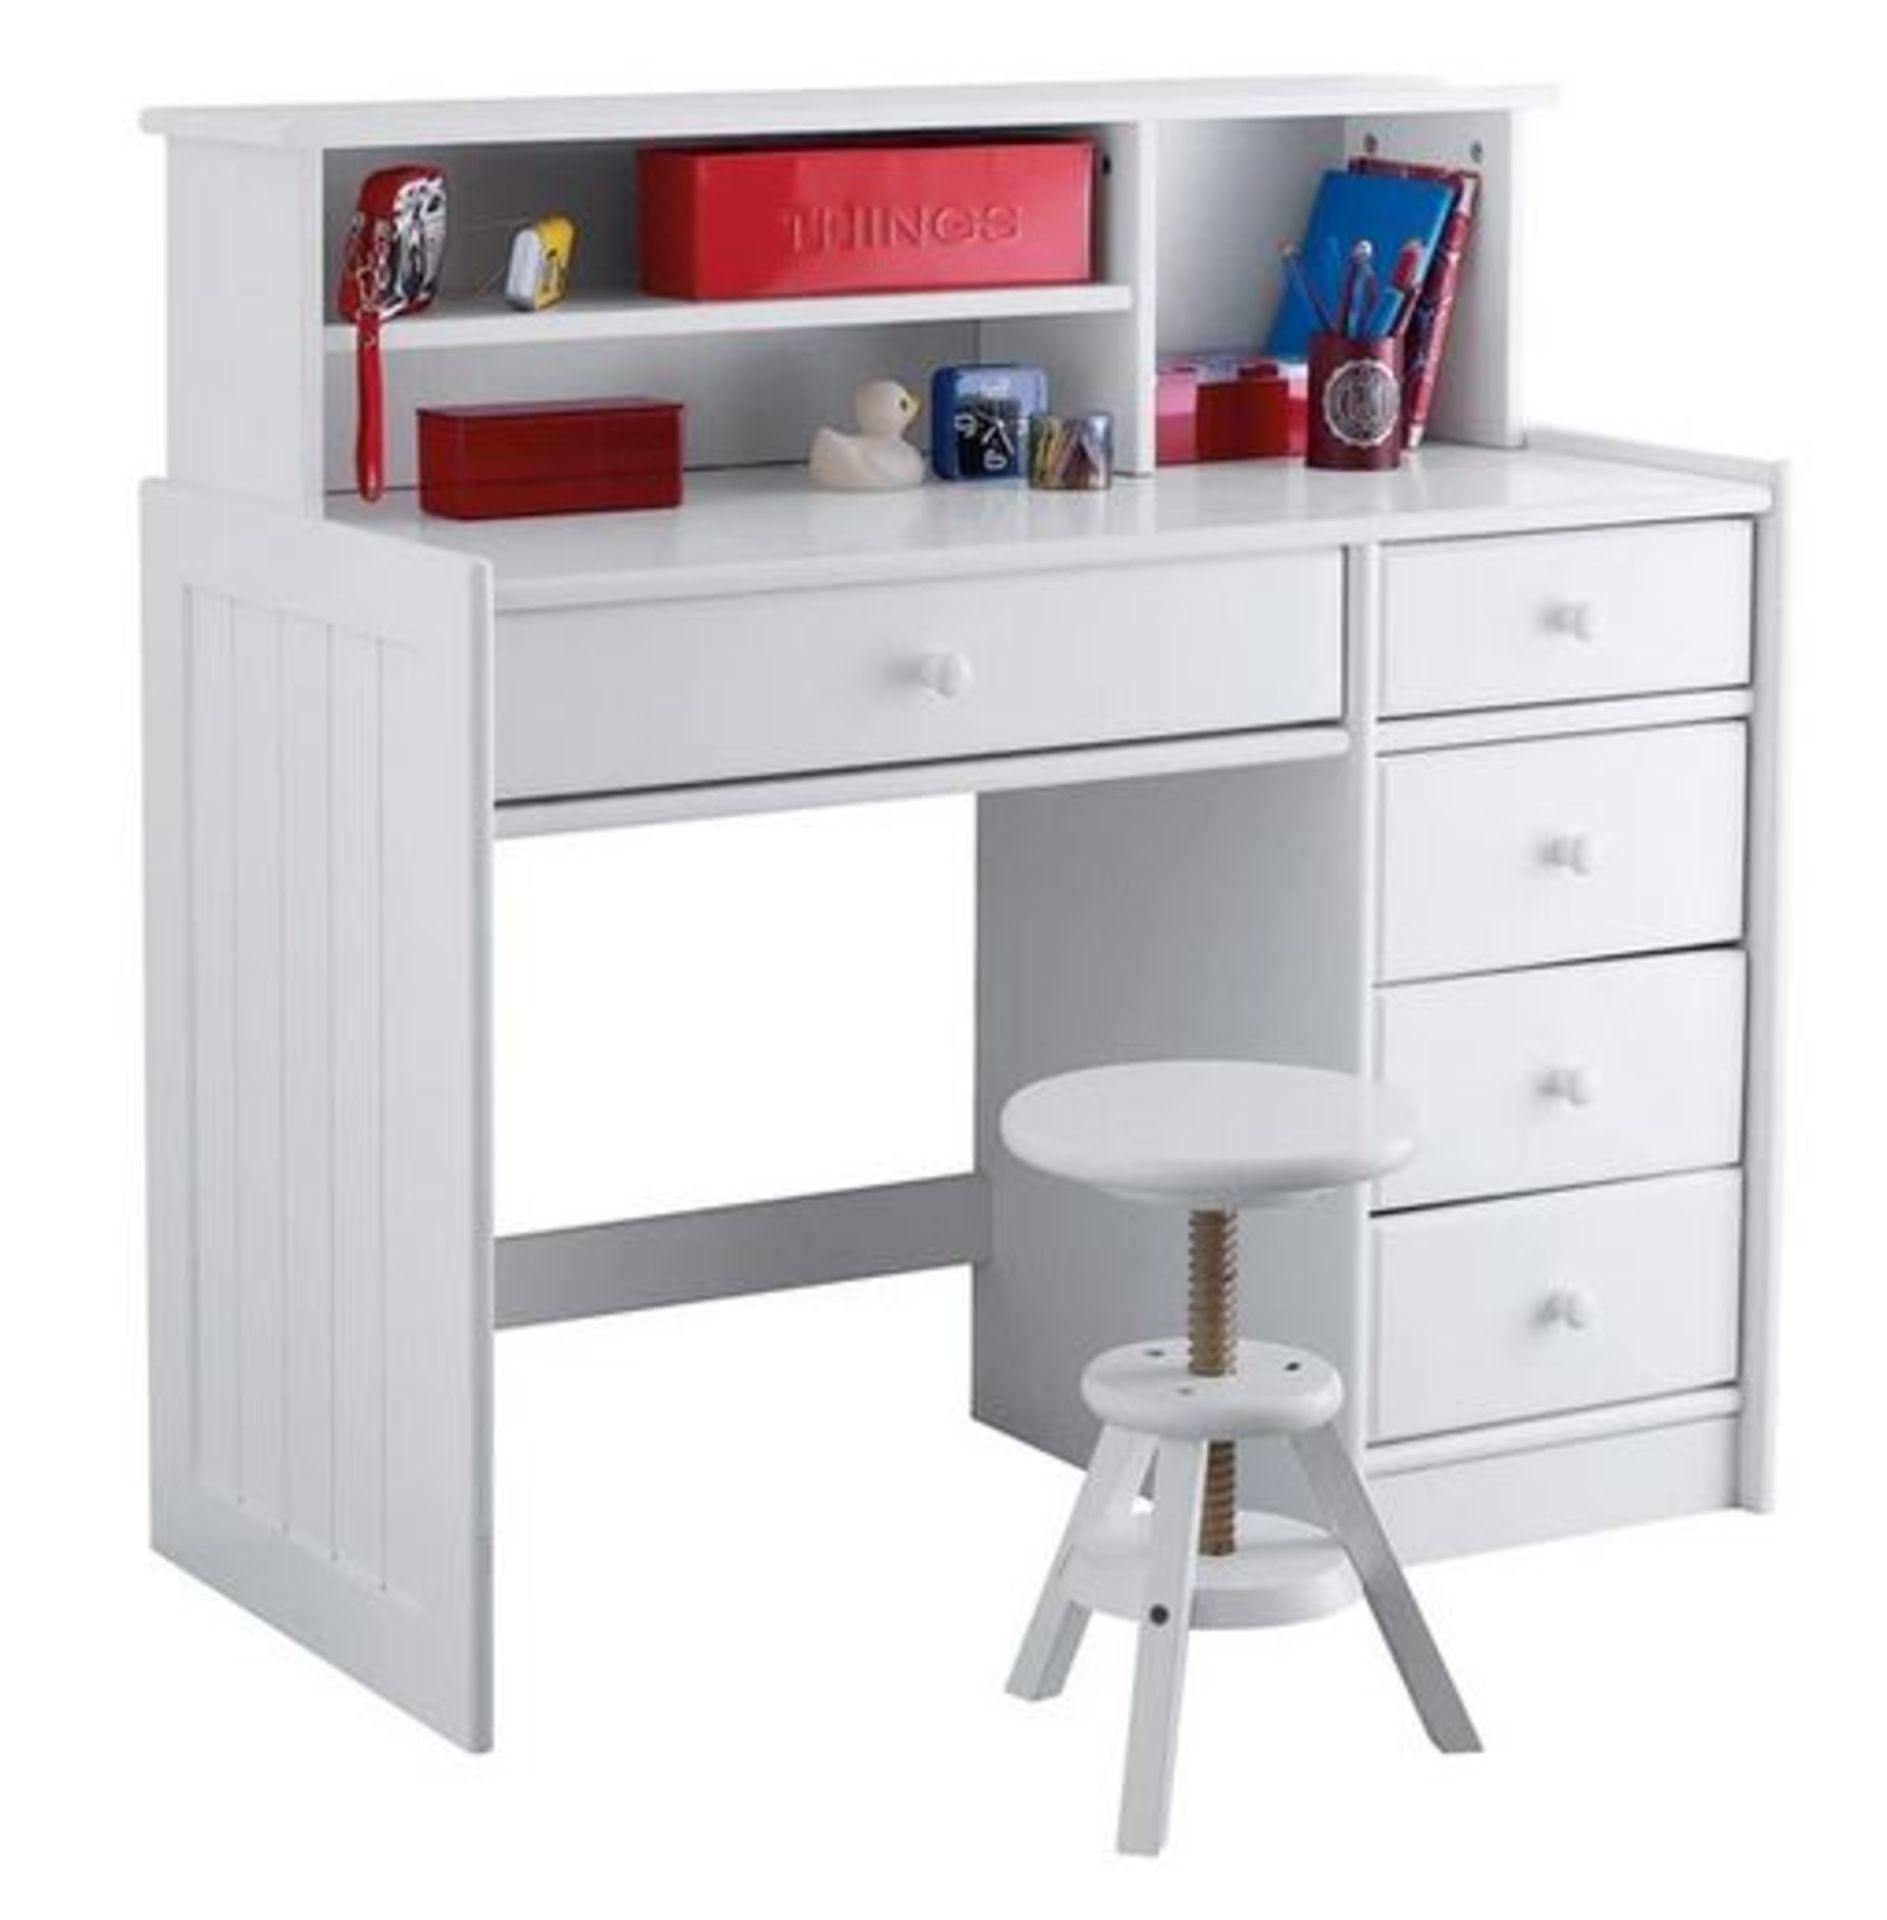 1 BOXED LA REDOUTE GABY SOLID PINE DESK EXTENDER IN WHITE / RRP £75.00 (VIEWING HIGHLY RECOMMENDED) - Image 2 of 2